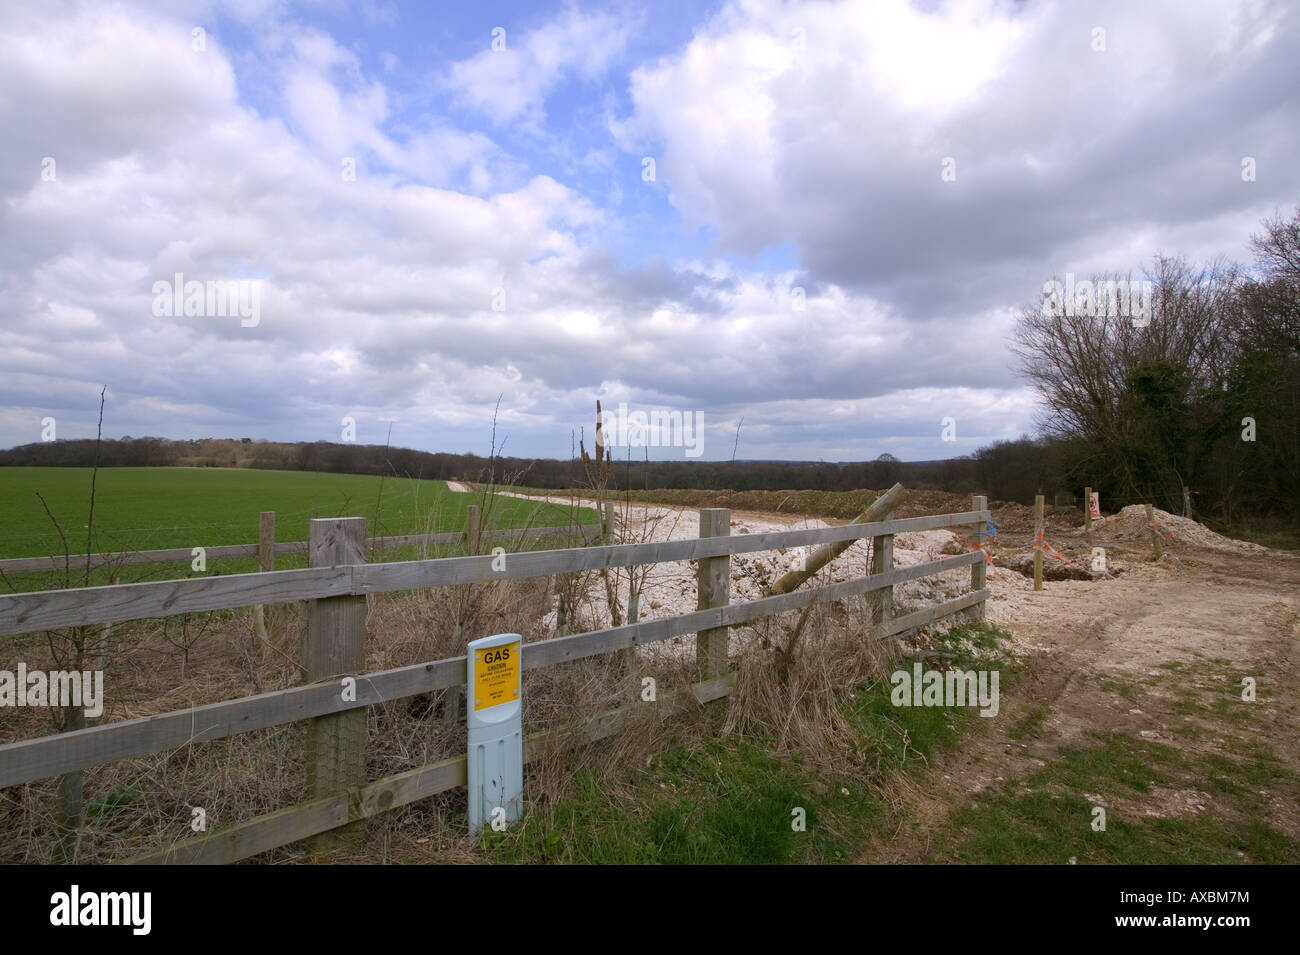 Image showing the effect of a gas pipeline from Humbley Grove Hampshire has had on the green field environment Stock Photo